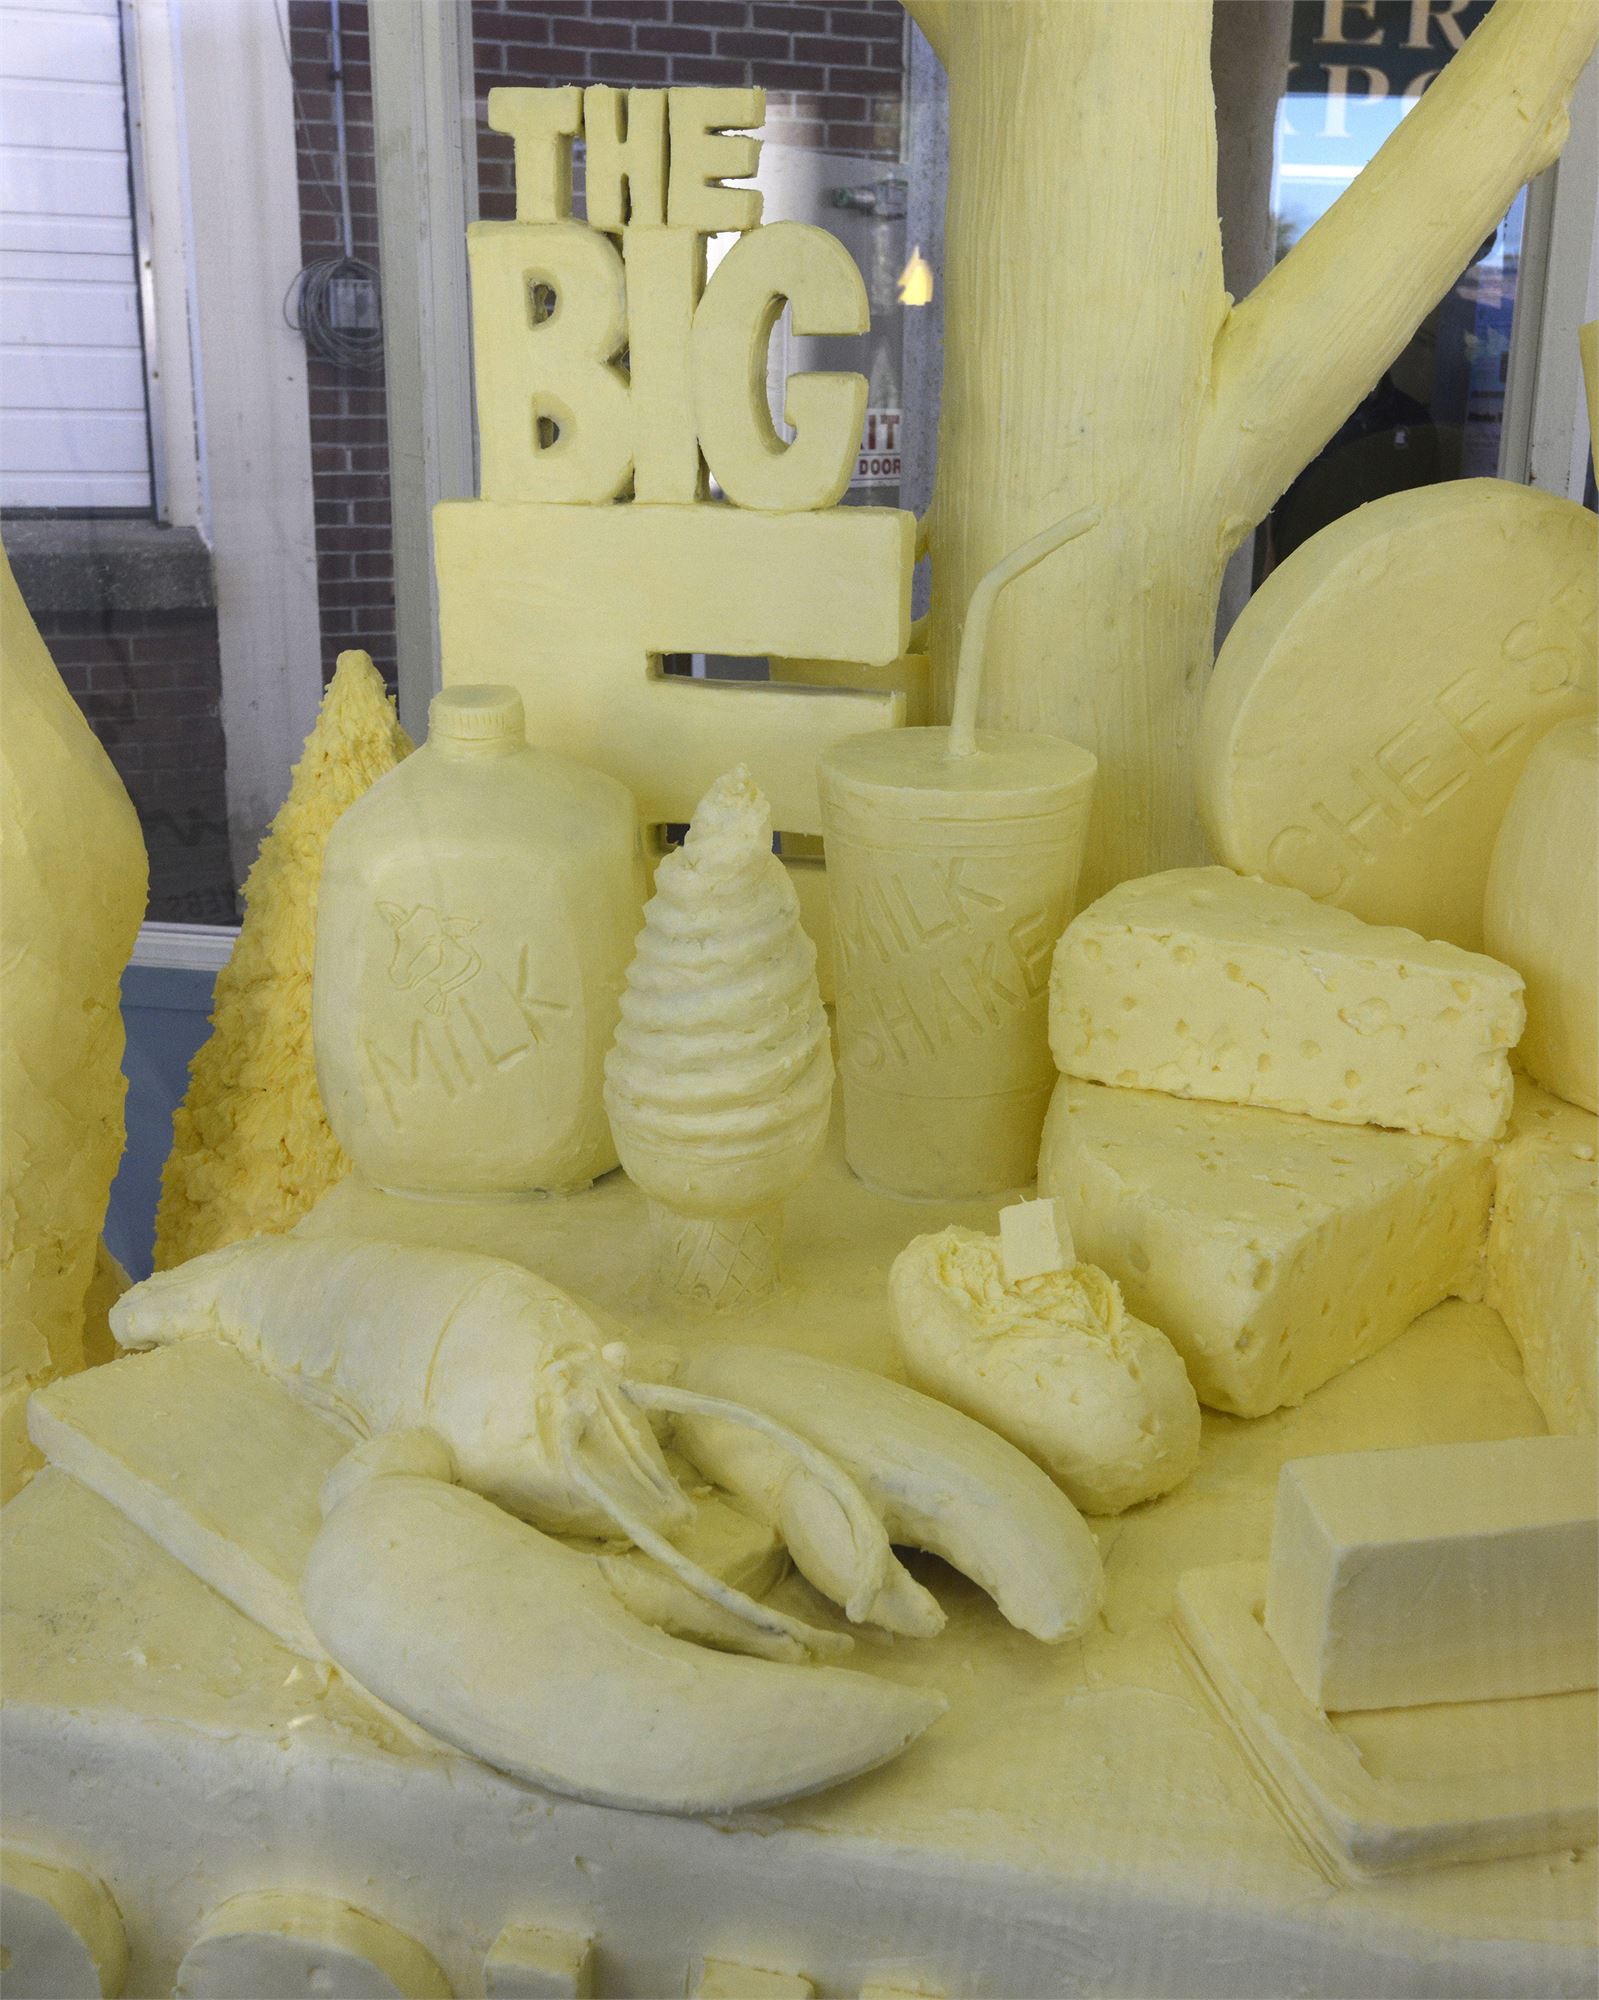 A detailed sculpture made from butter of a 600 pound man eating a